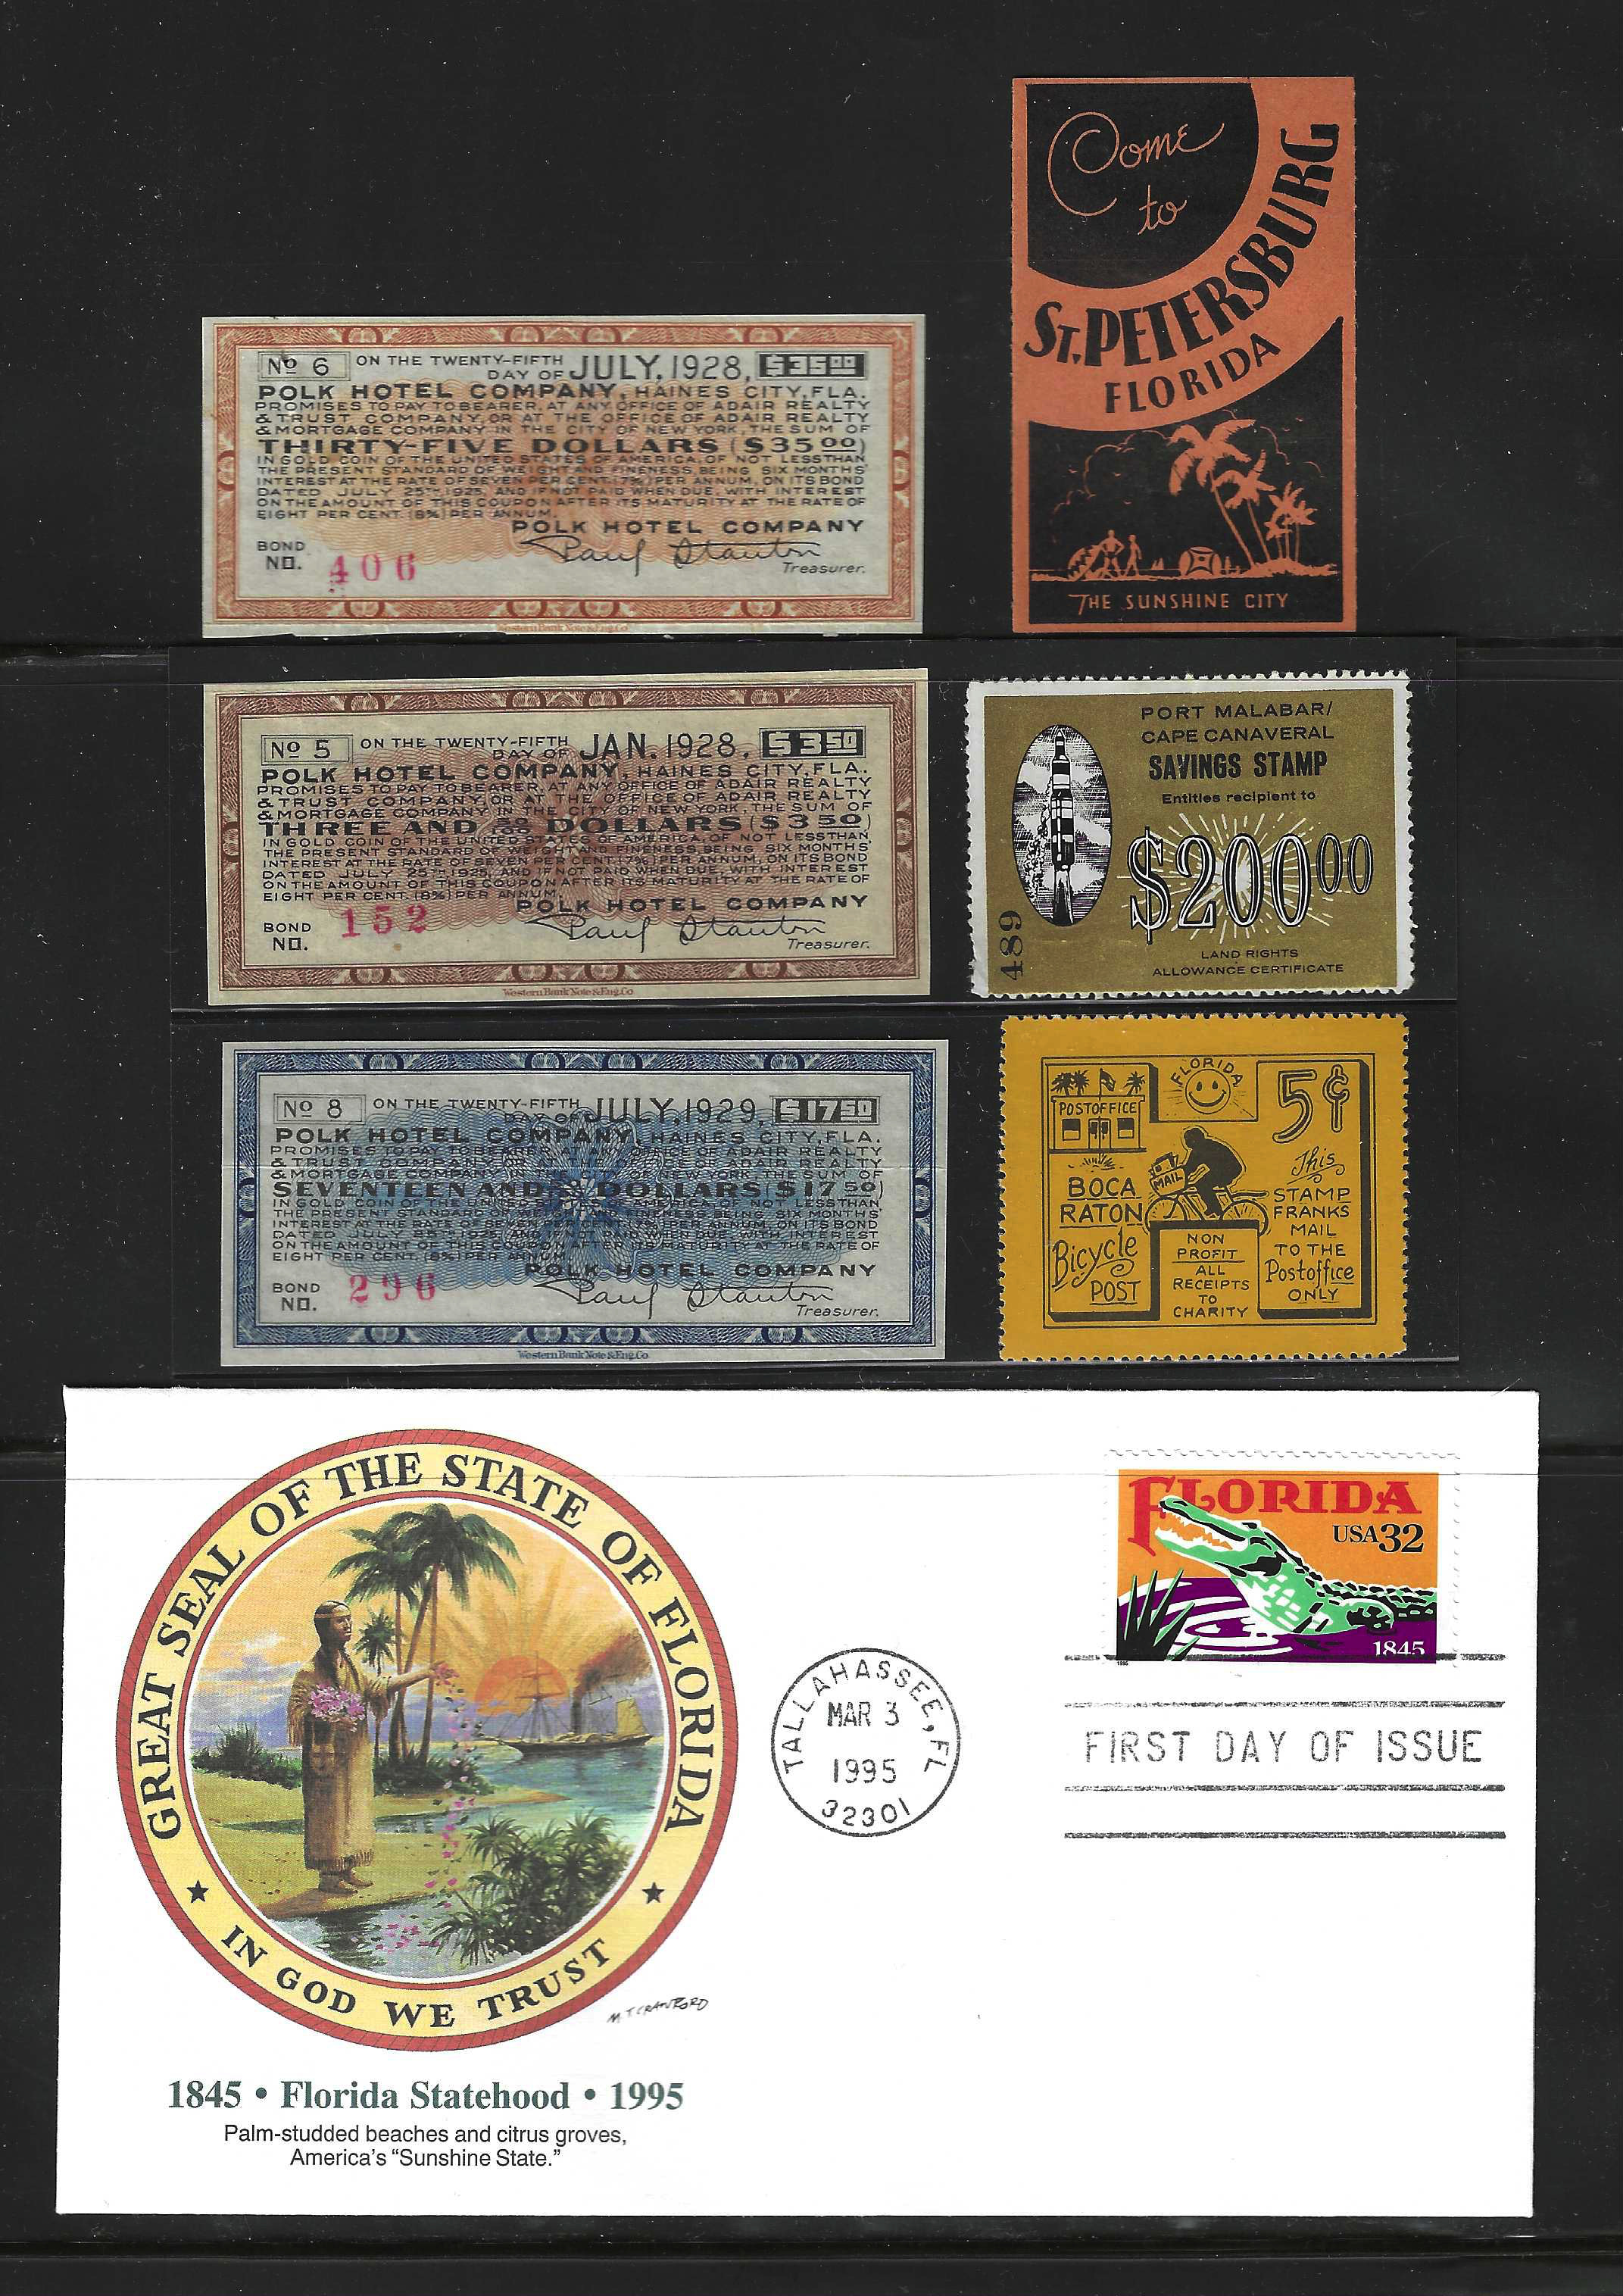 FL cinderellas, incl  hotel bond coupons, several ad stamps, Boca Raton local Post, 1995 Florida stamp FDC